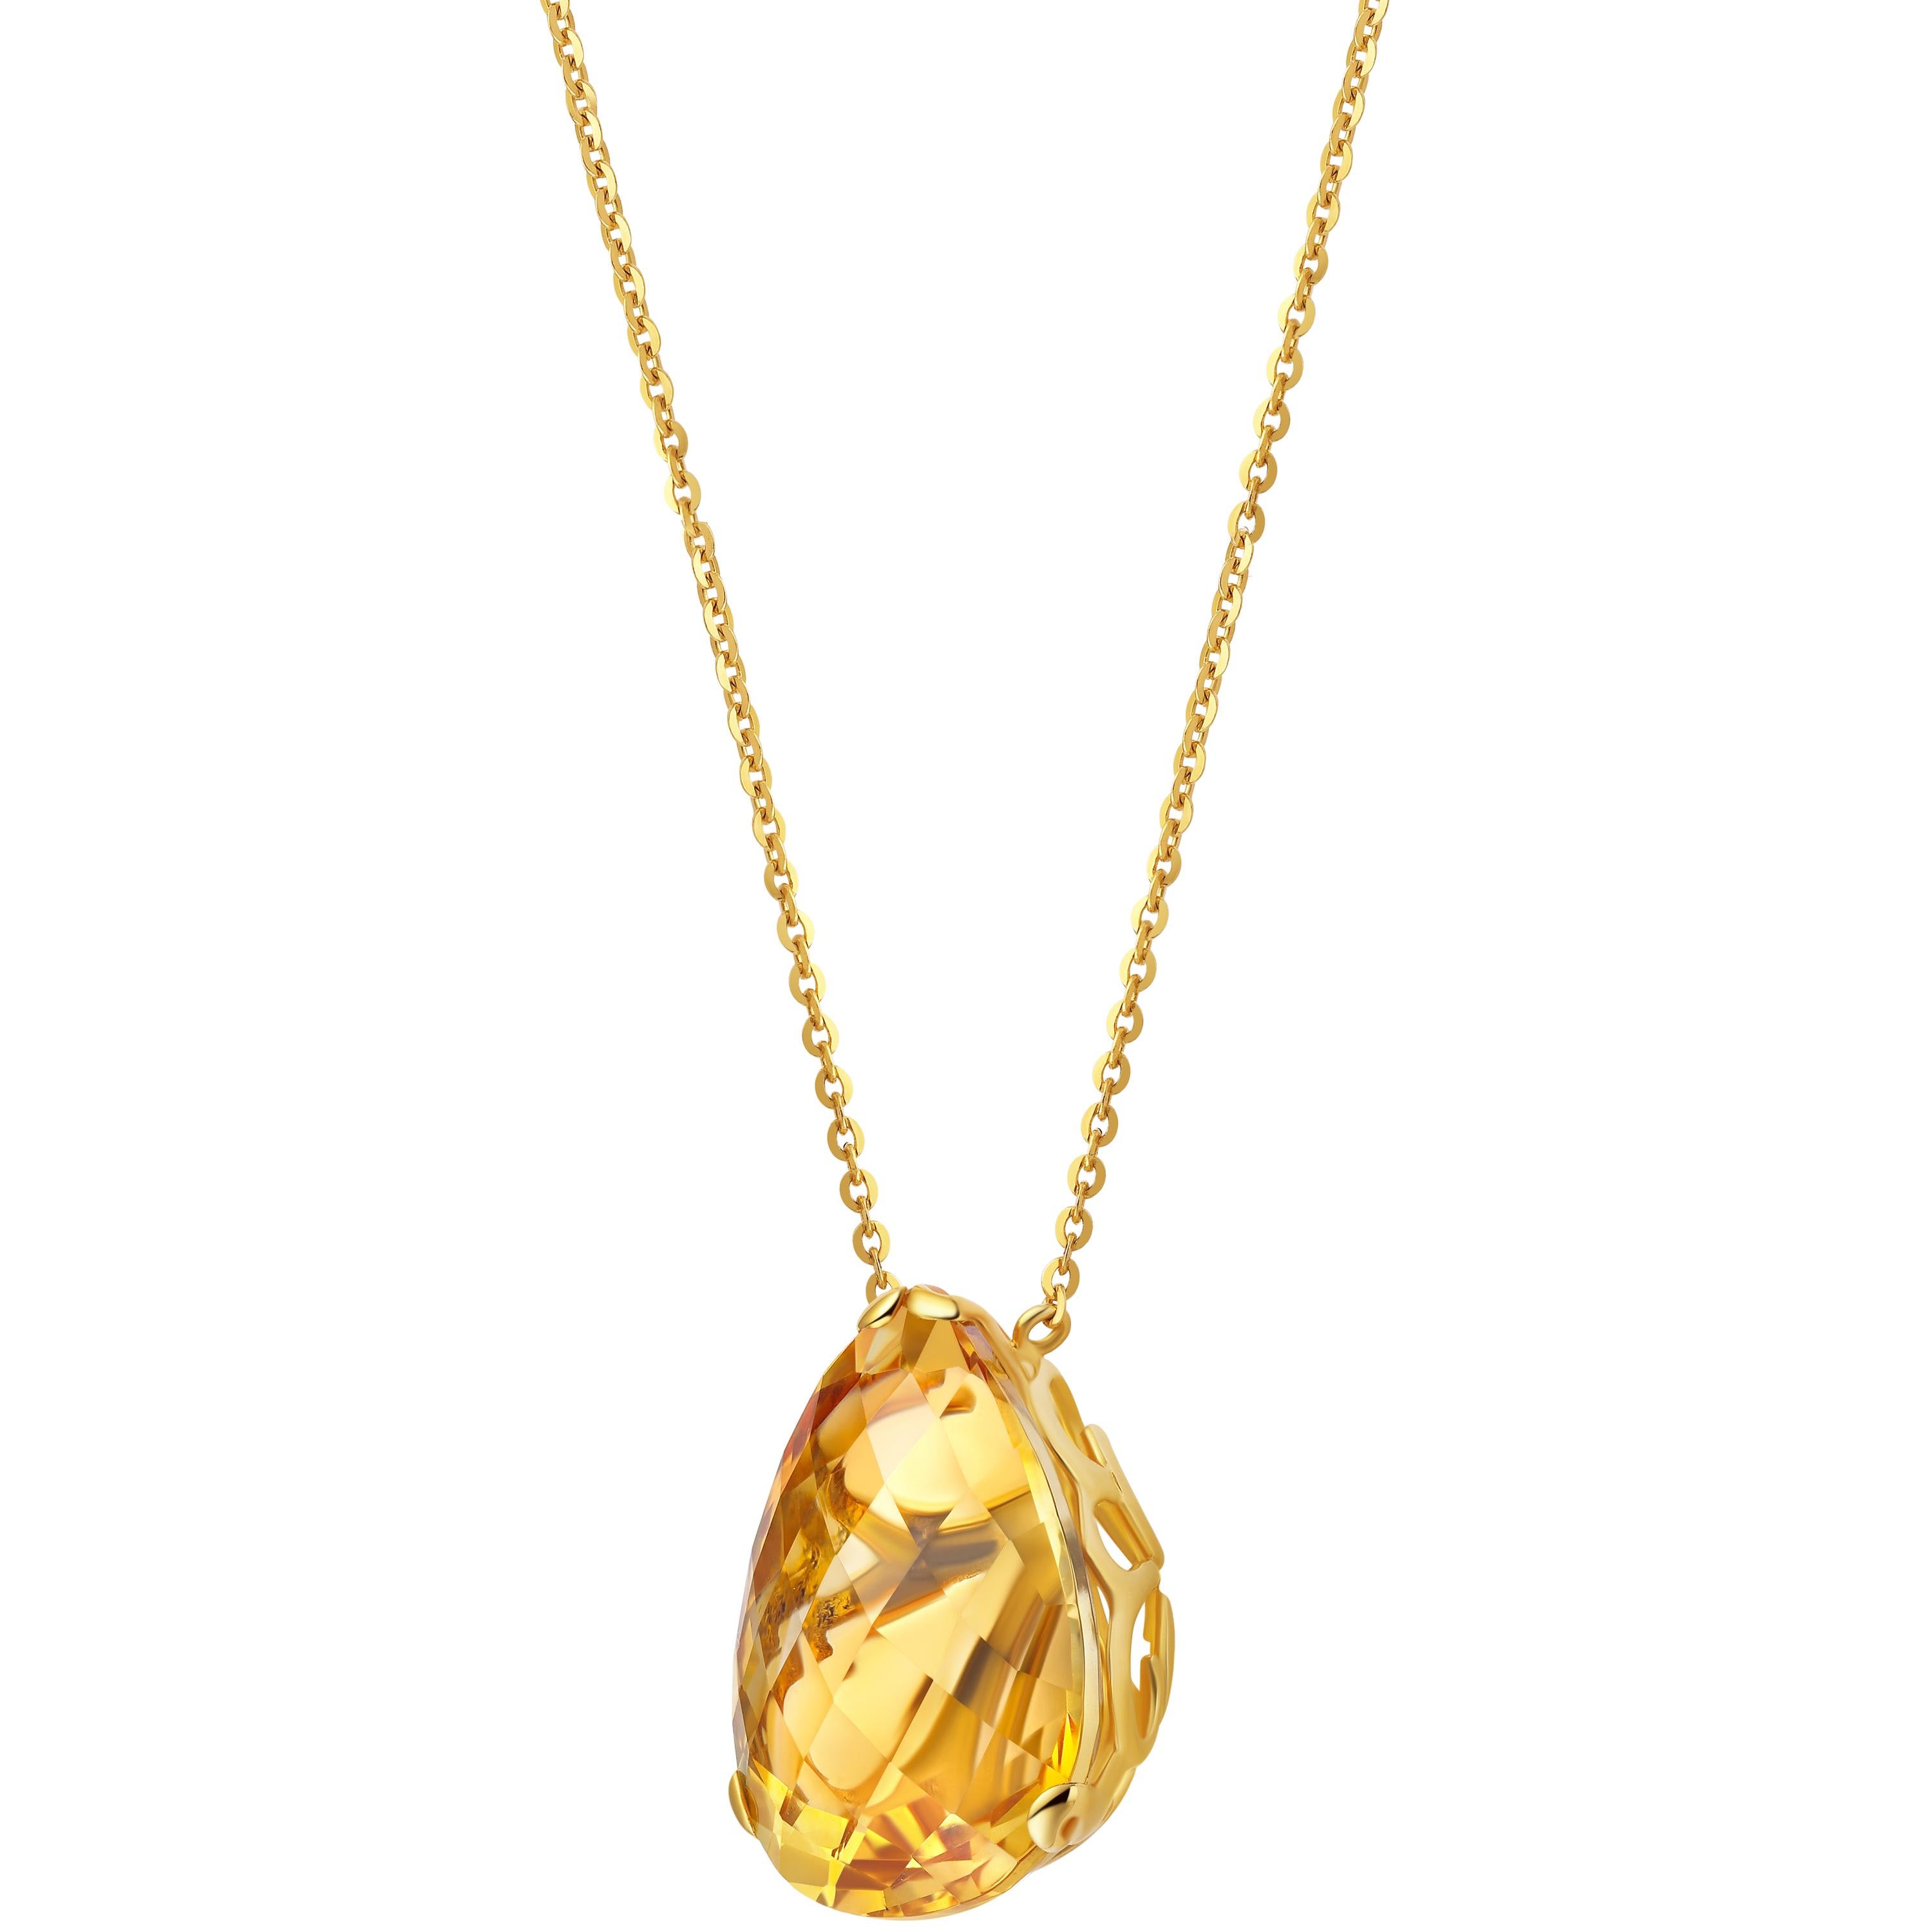 Description:
Whispering small pear stone pendant with a 4.5ct citrine set in 18ct yellow gold. Chain length is 16 inches + 1 inch extension.

Inspiration:
Emulating femininity and glamour, the Whispering collection is full of colour and form.